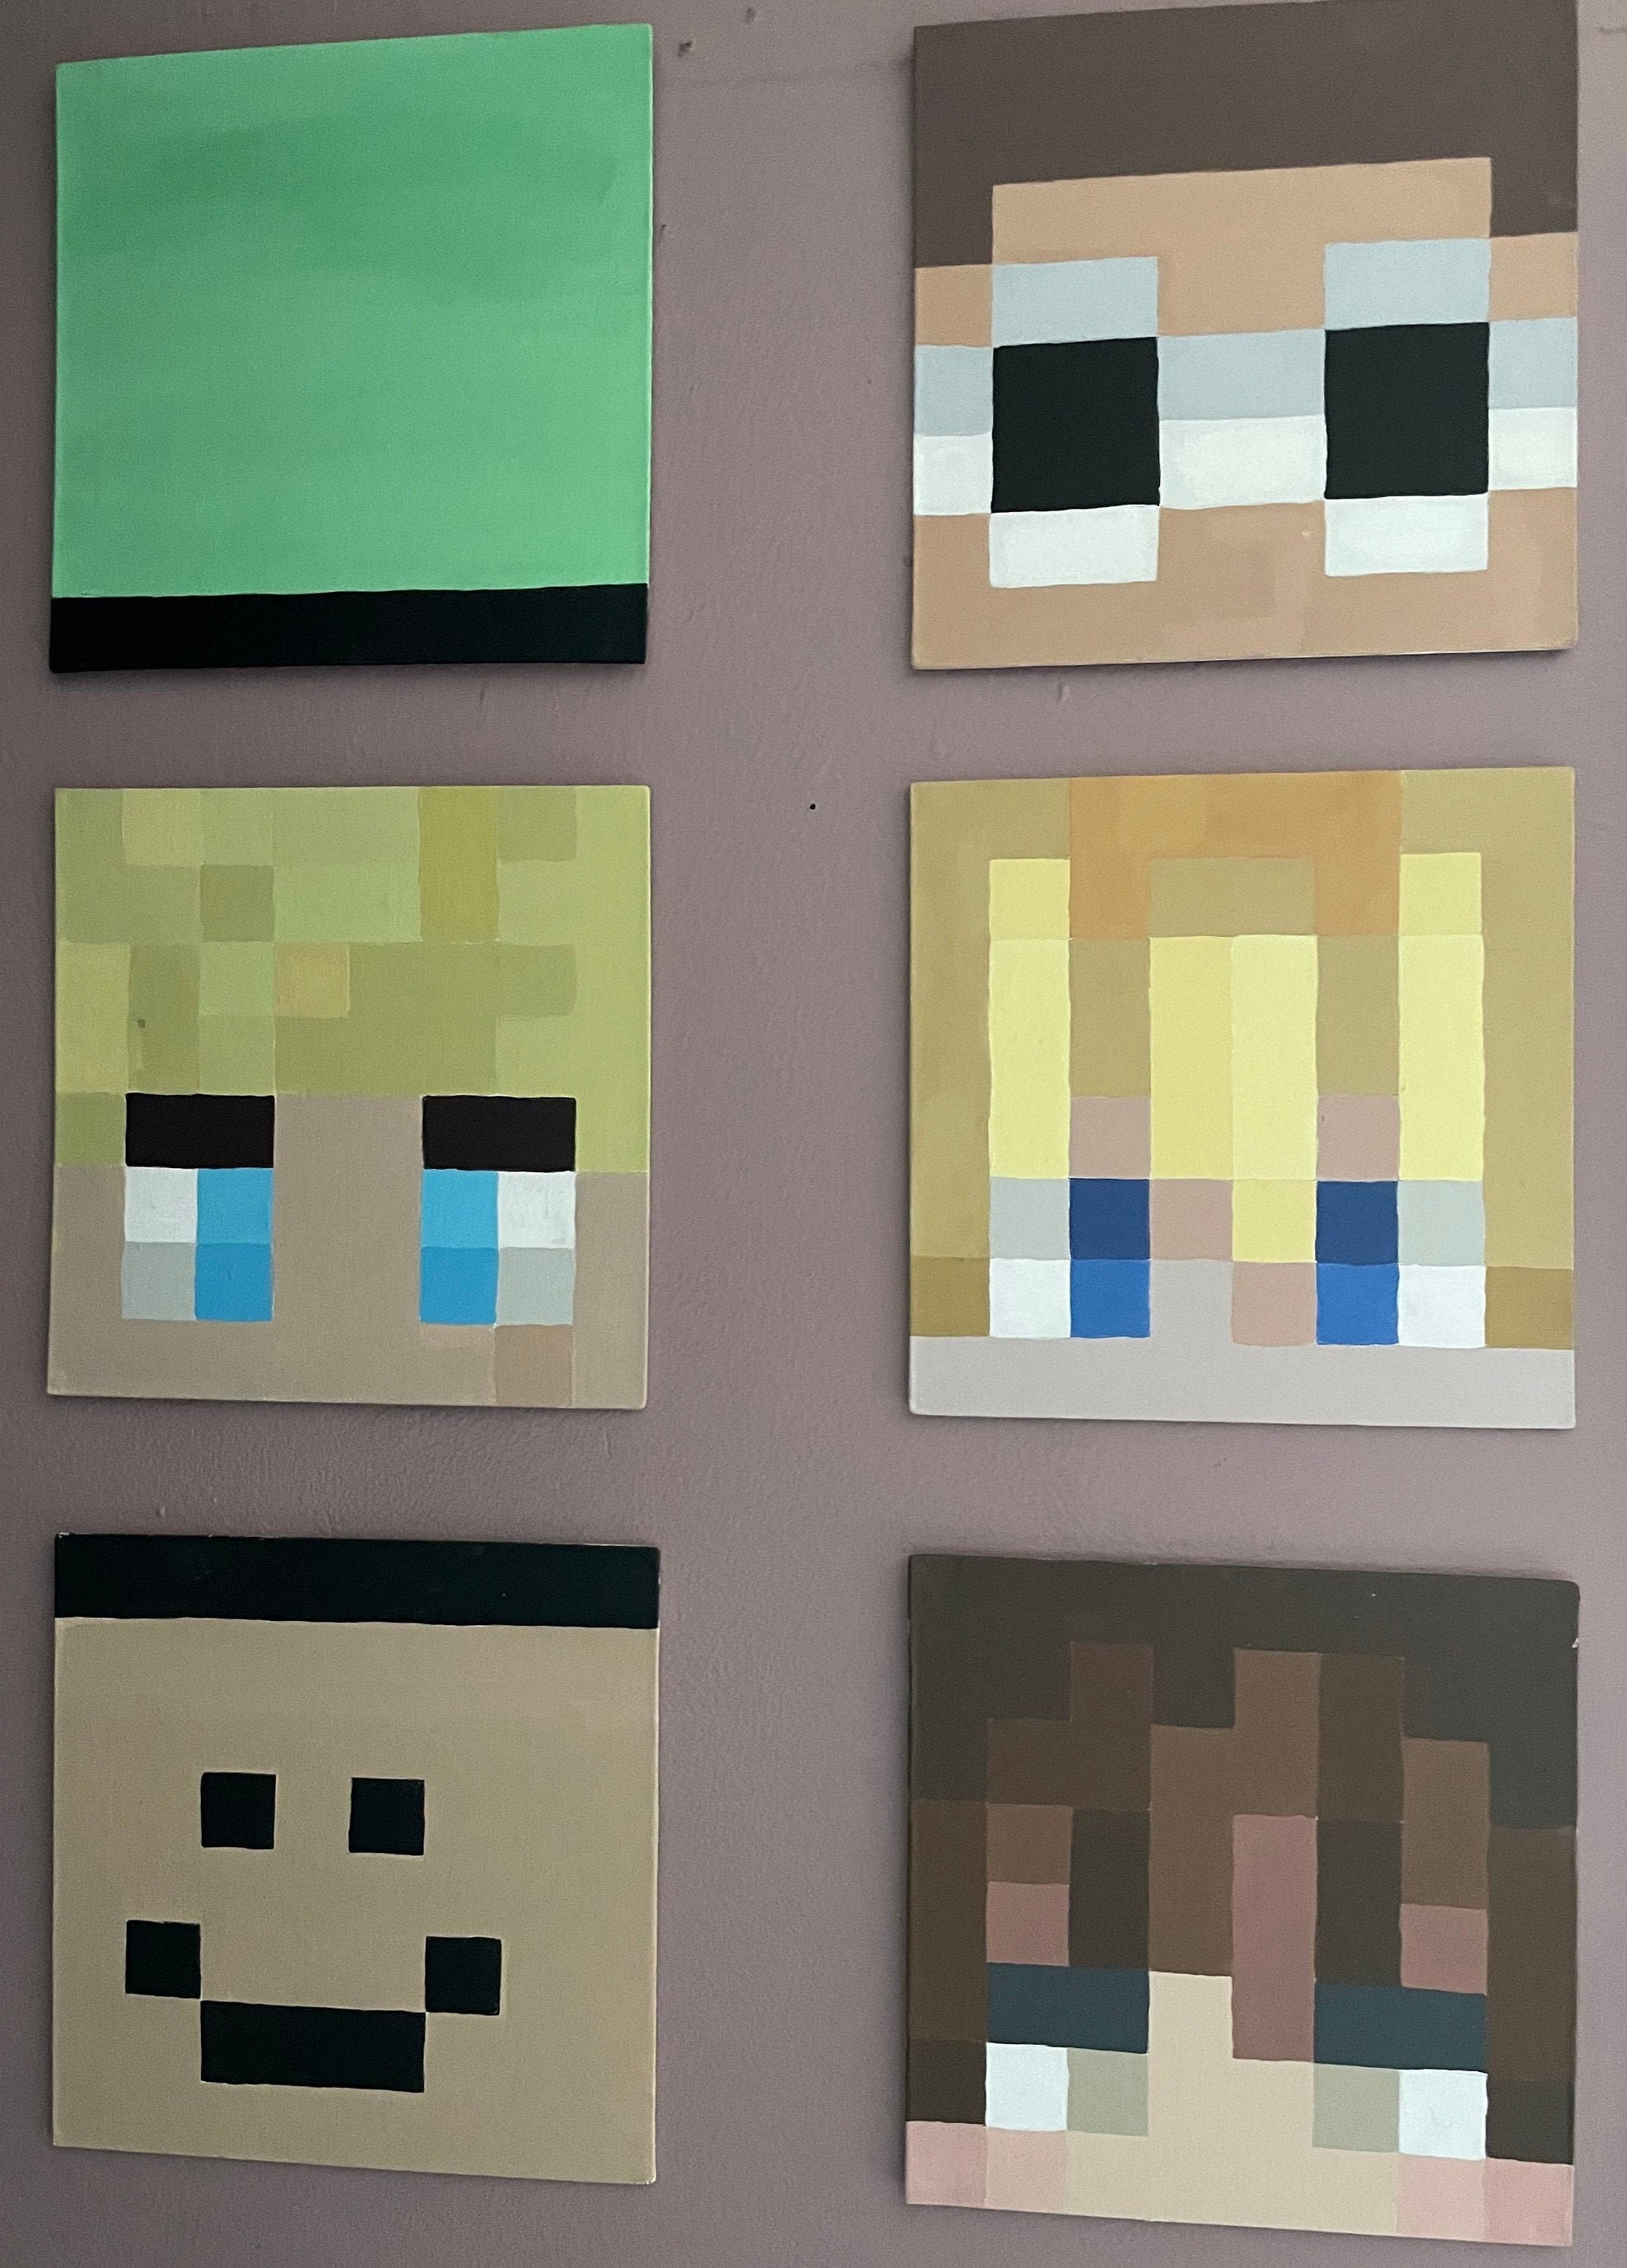 Dream Smp Minecraft Head Paintings 8x8 Etsy